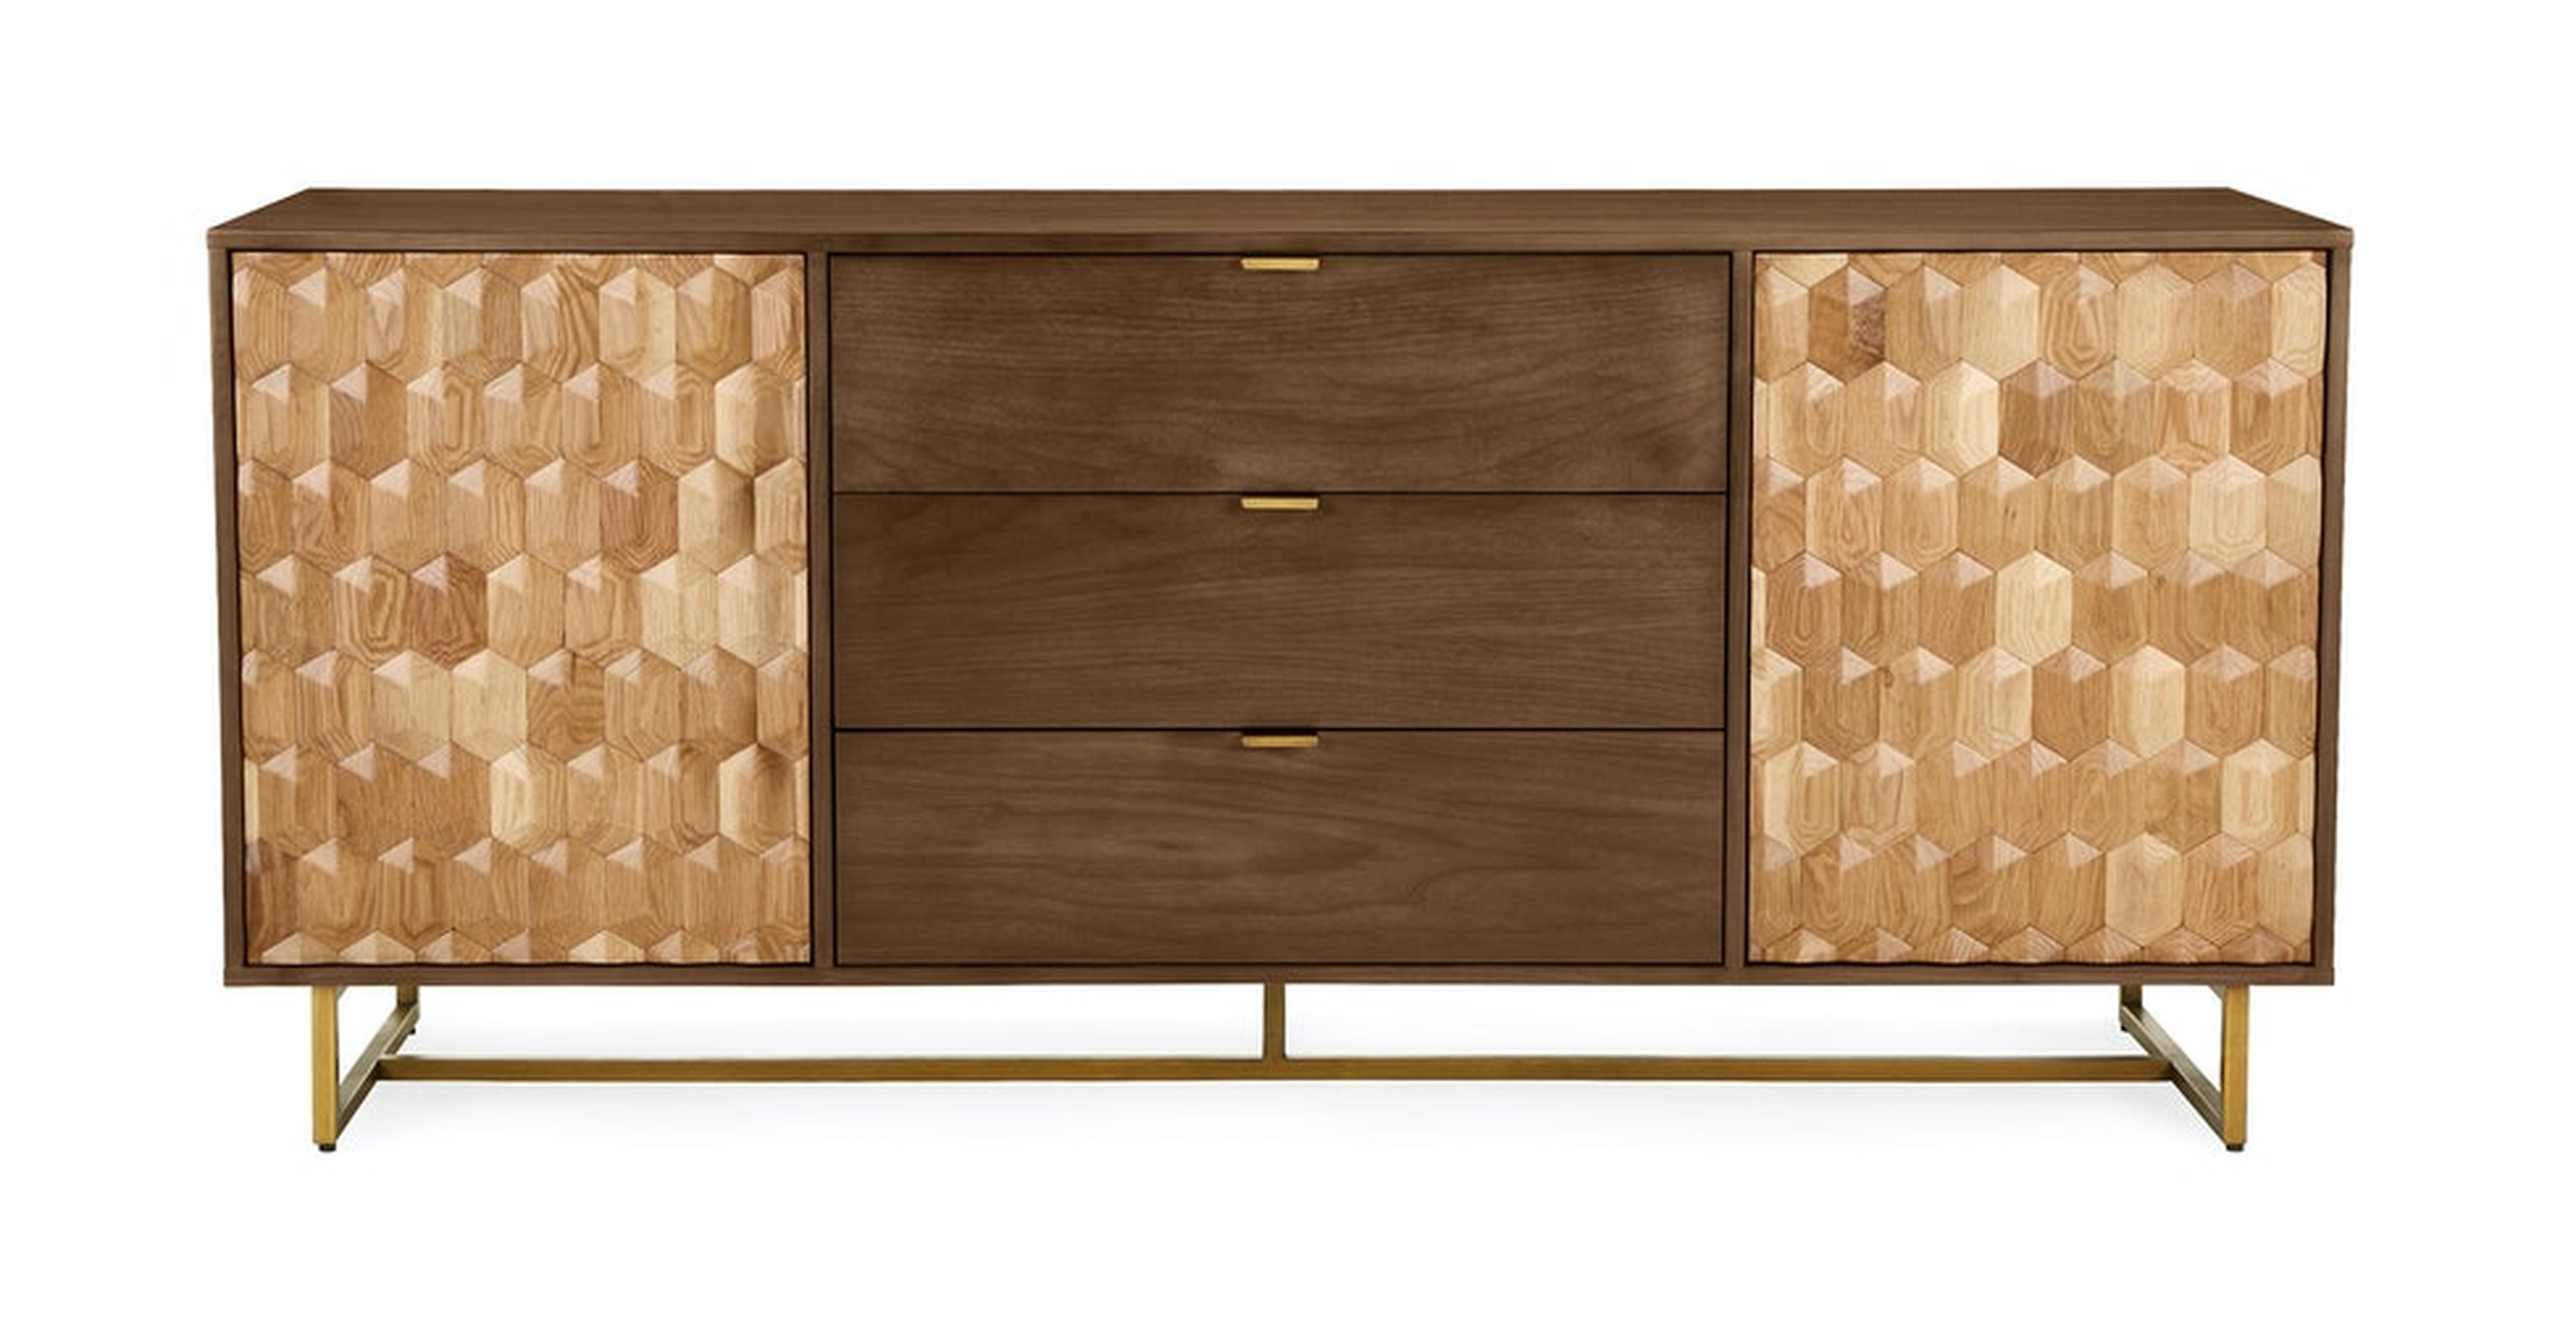 Geome 71" Sideboard - Article